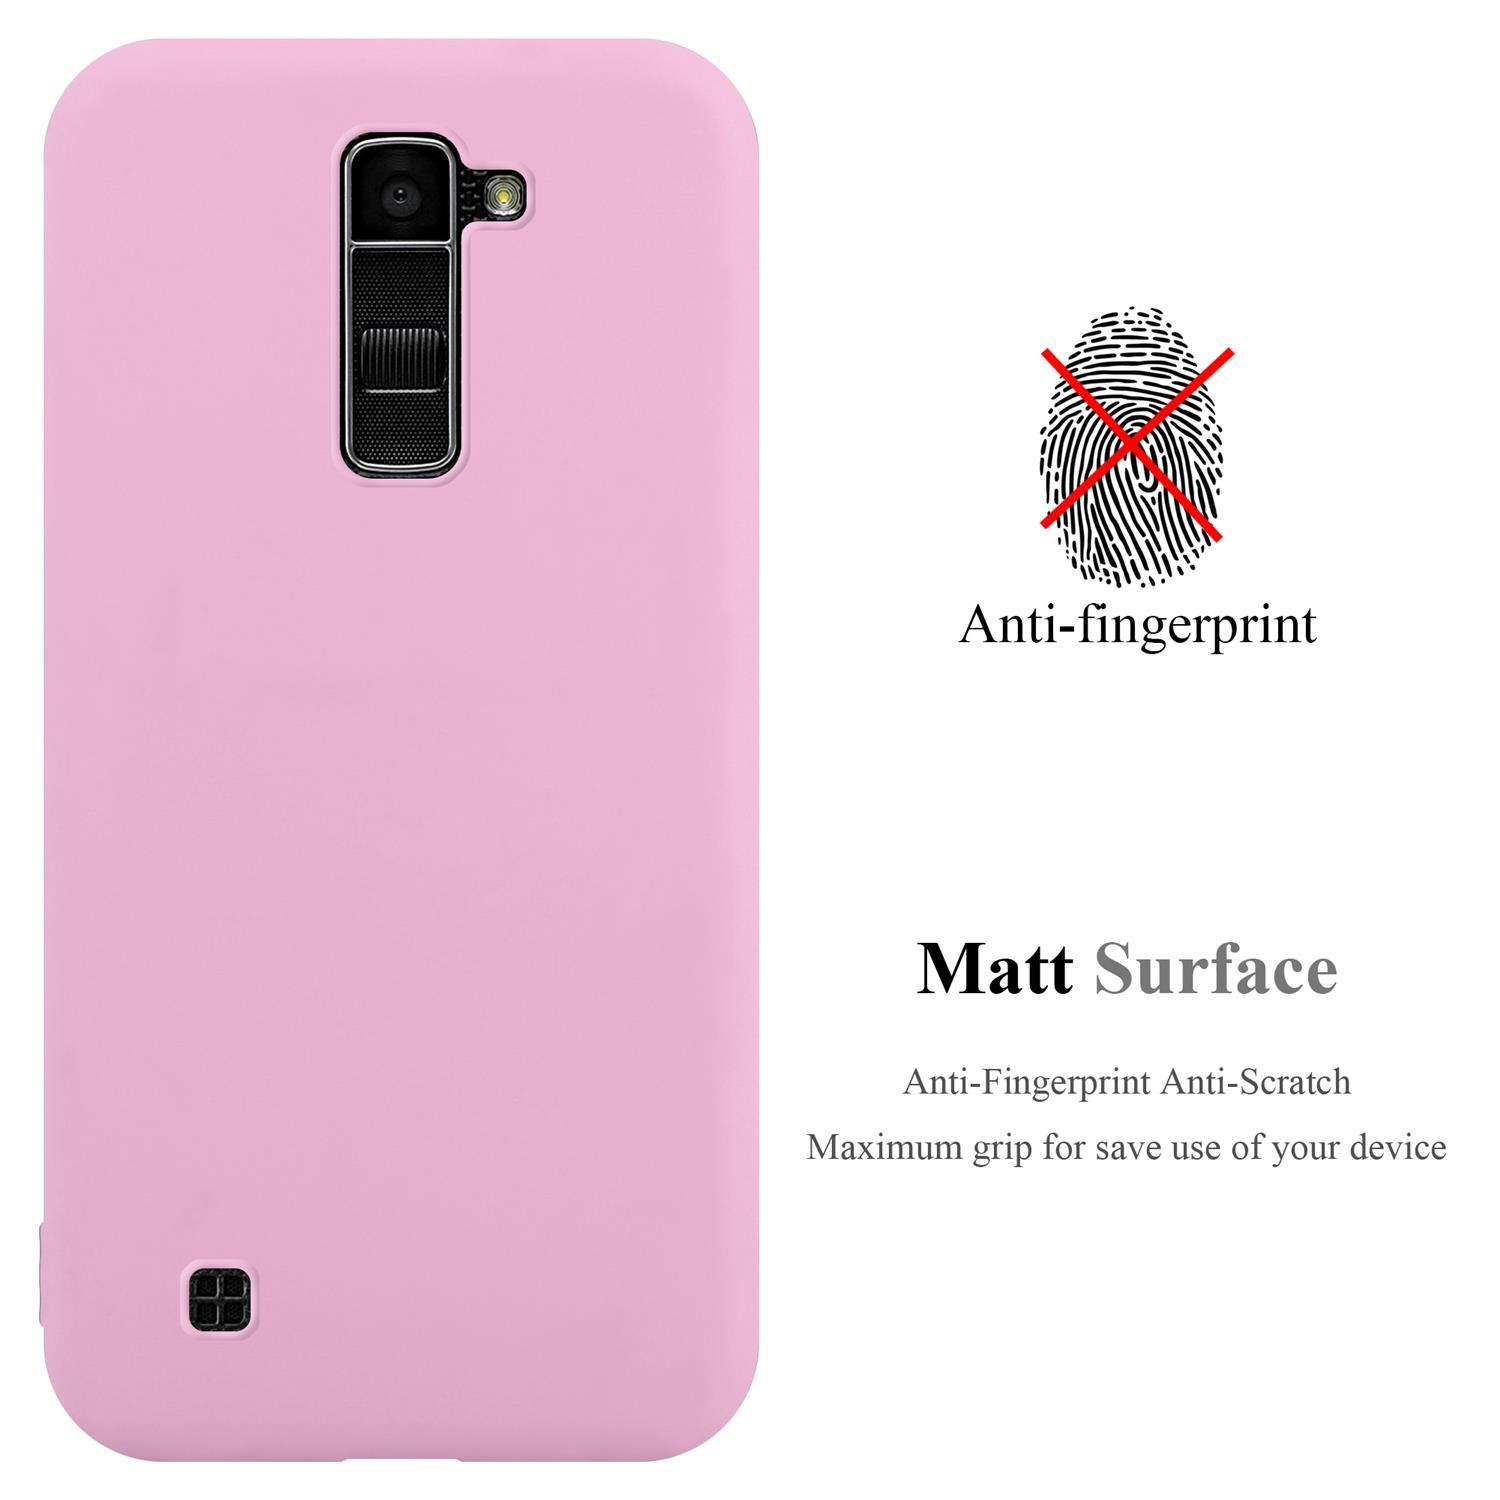 CADORABO im 2016, Style, Candy Hülle ROSA CANDY TPU LG, K10 Backcover,